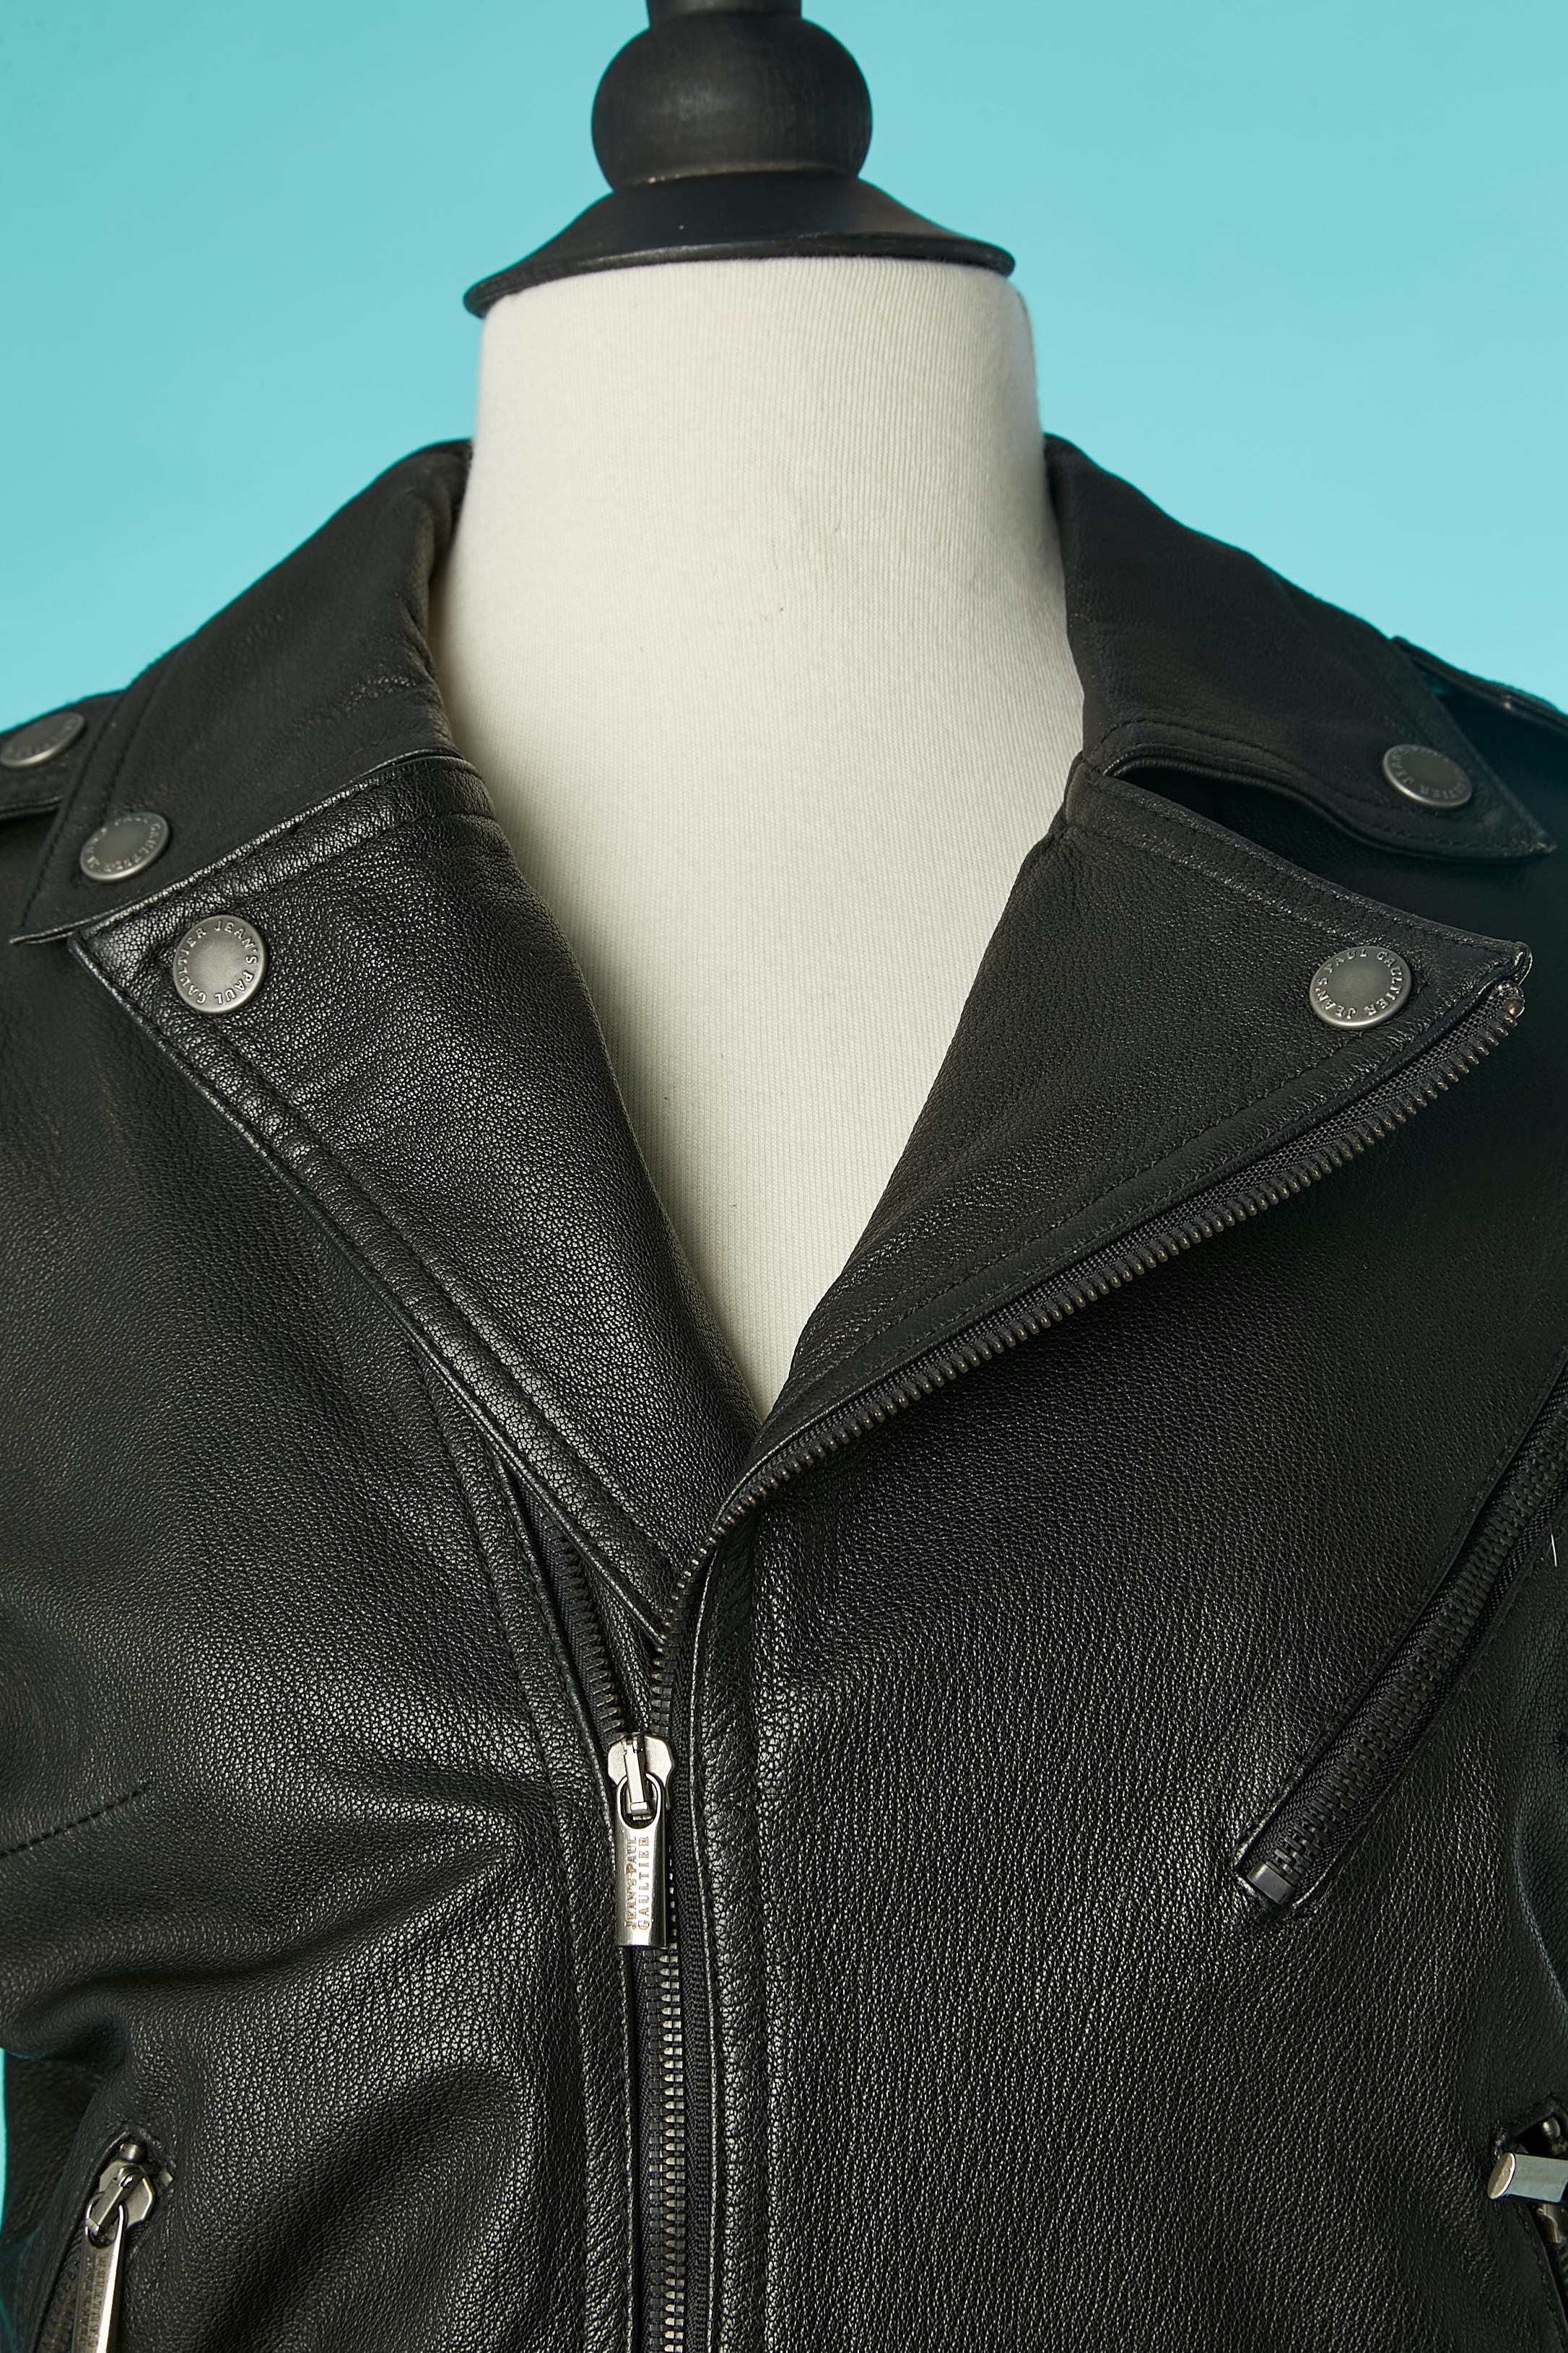 Black leather biker jacket slightly padded. Lining composition: 100% polyester
Zip closure middle front , pockets and cuffs. Branded zip puller and snaps. 
Leather belt, belt-loop and metal buckle 
SIZE S / 36 (Fr) / 6 (Us)